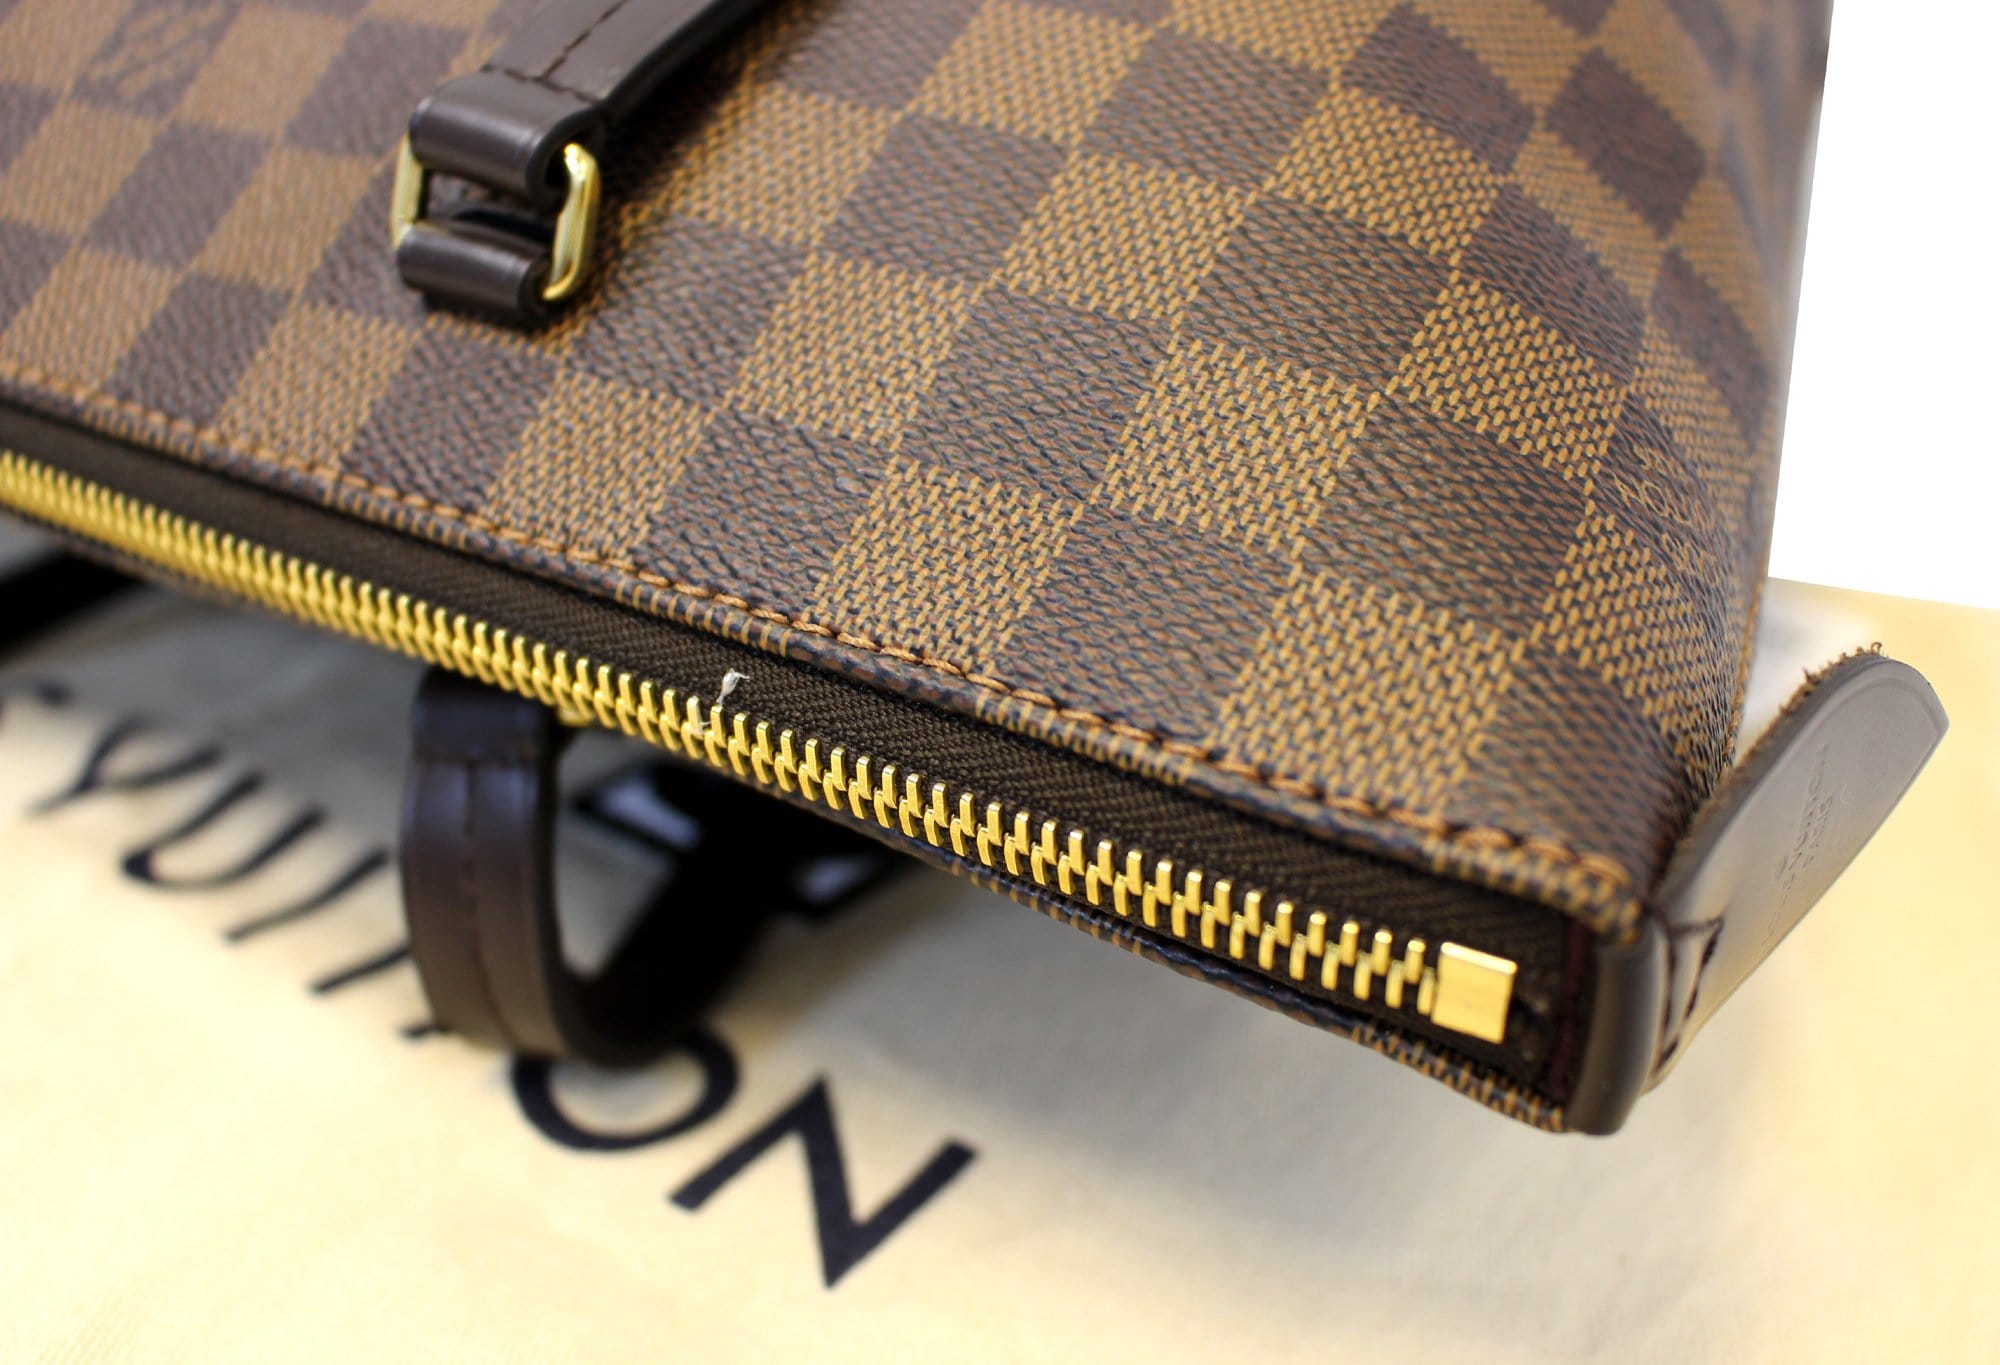 Louis Vuitton Iena MM Damier Ebene Canvas - Prestige Online Store - Luxury  Items with Exceptional Savings from the eShop